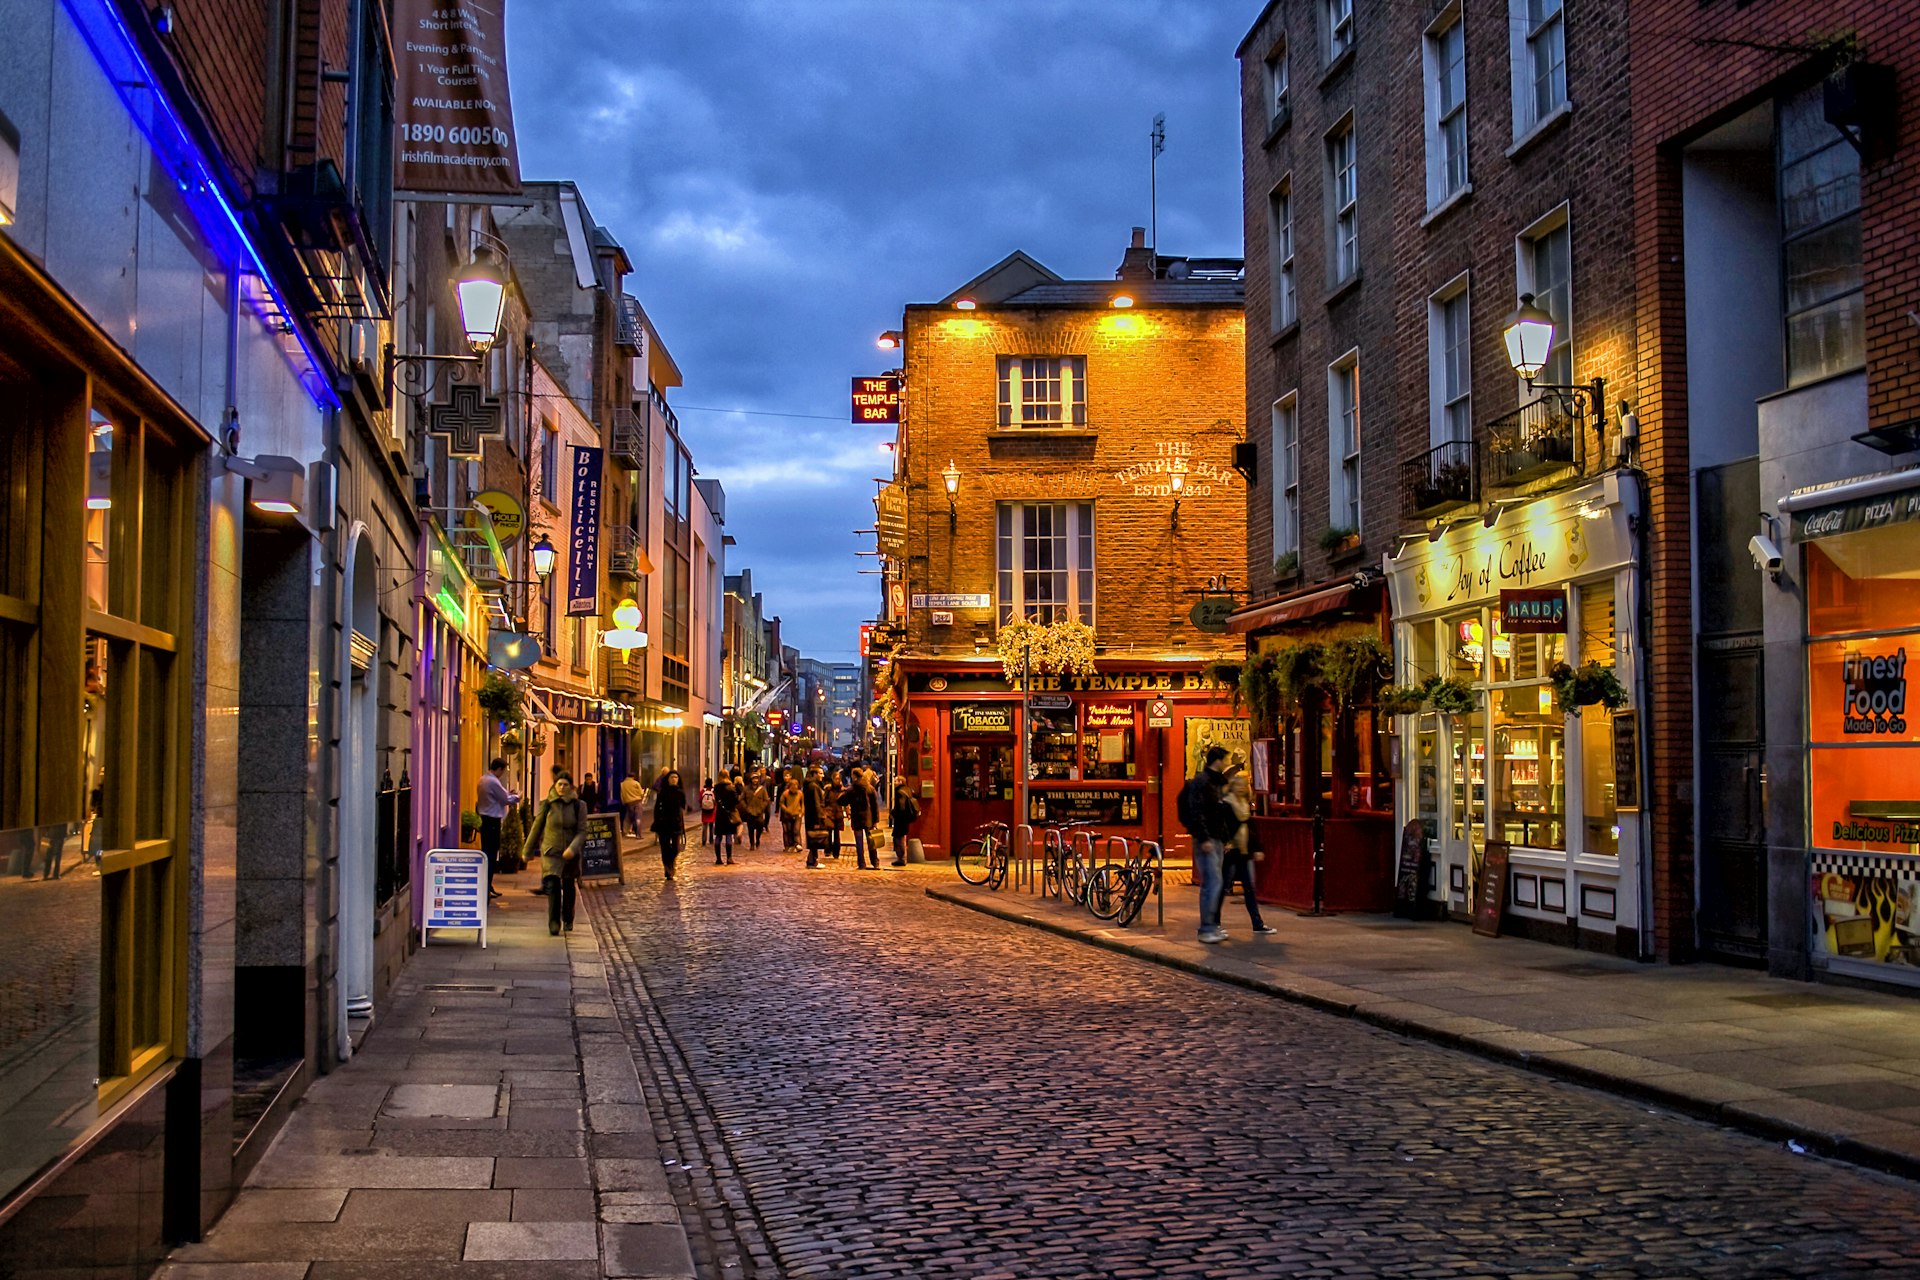 500px Photo ID: 100904953 - People at night in the Temple Bar district in Dublin. The Temple bar district is famous for his pubs and other nightlife entertainment